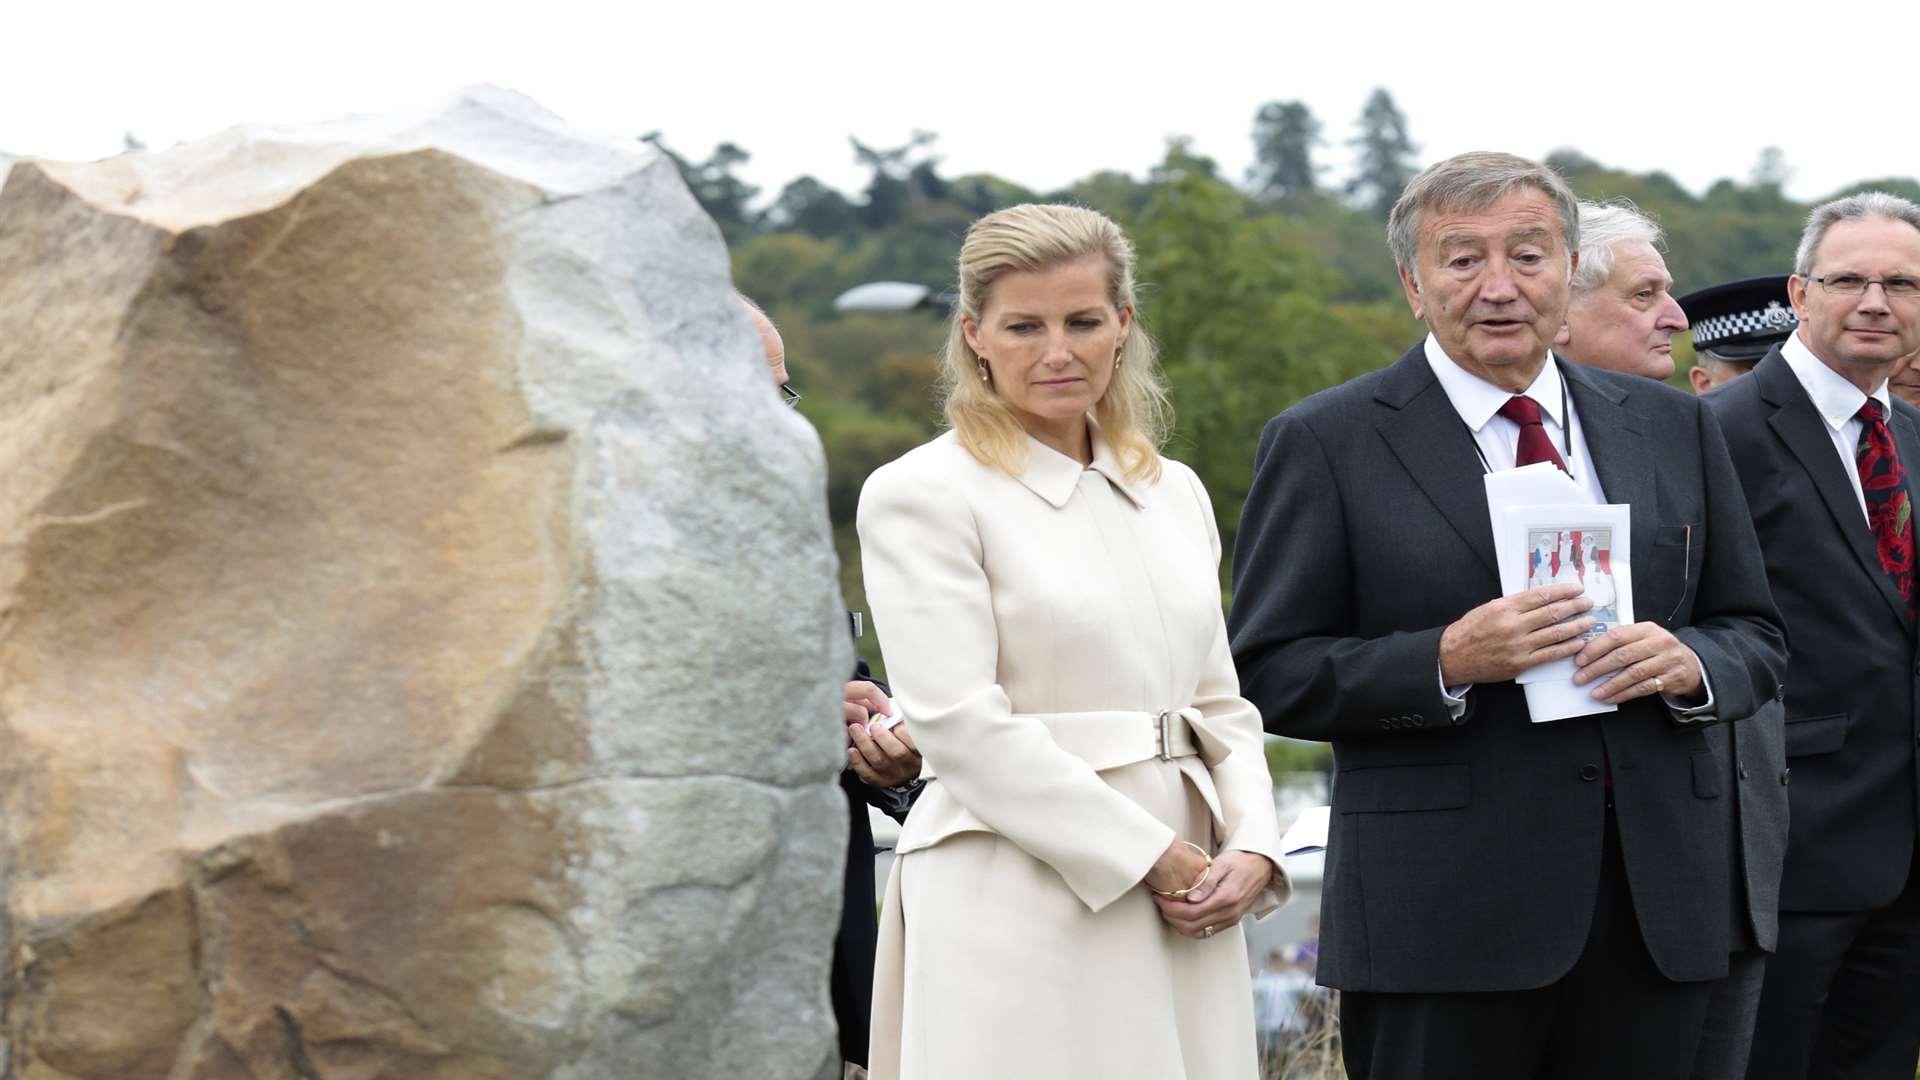 The Countess of Wessex looks on at the commemorative stone